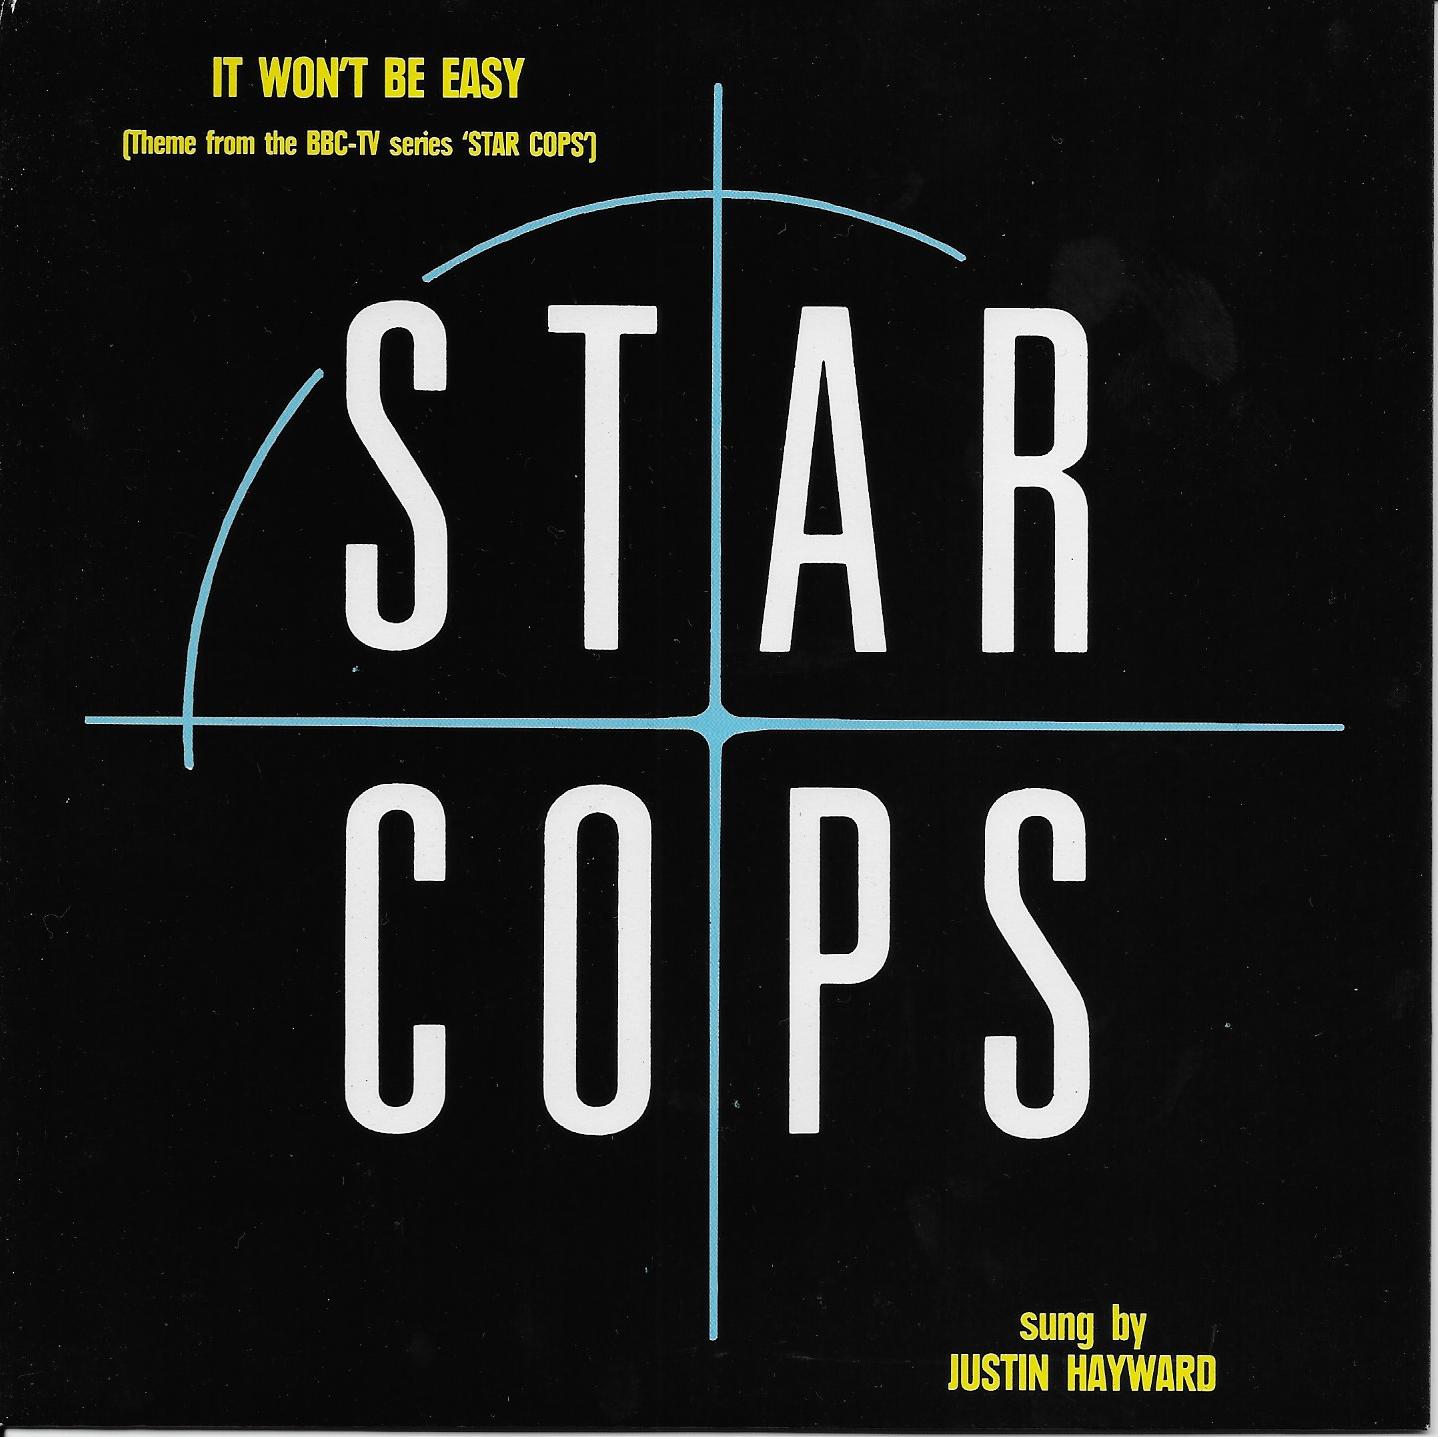 Picture of RESL 208 It won't be easy (Star cops) by artist Justin Hayward / Tony Visconti from the BBC singles - Records and Tapes library